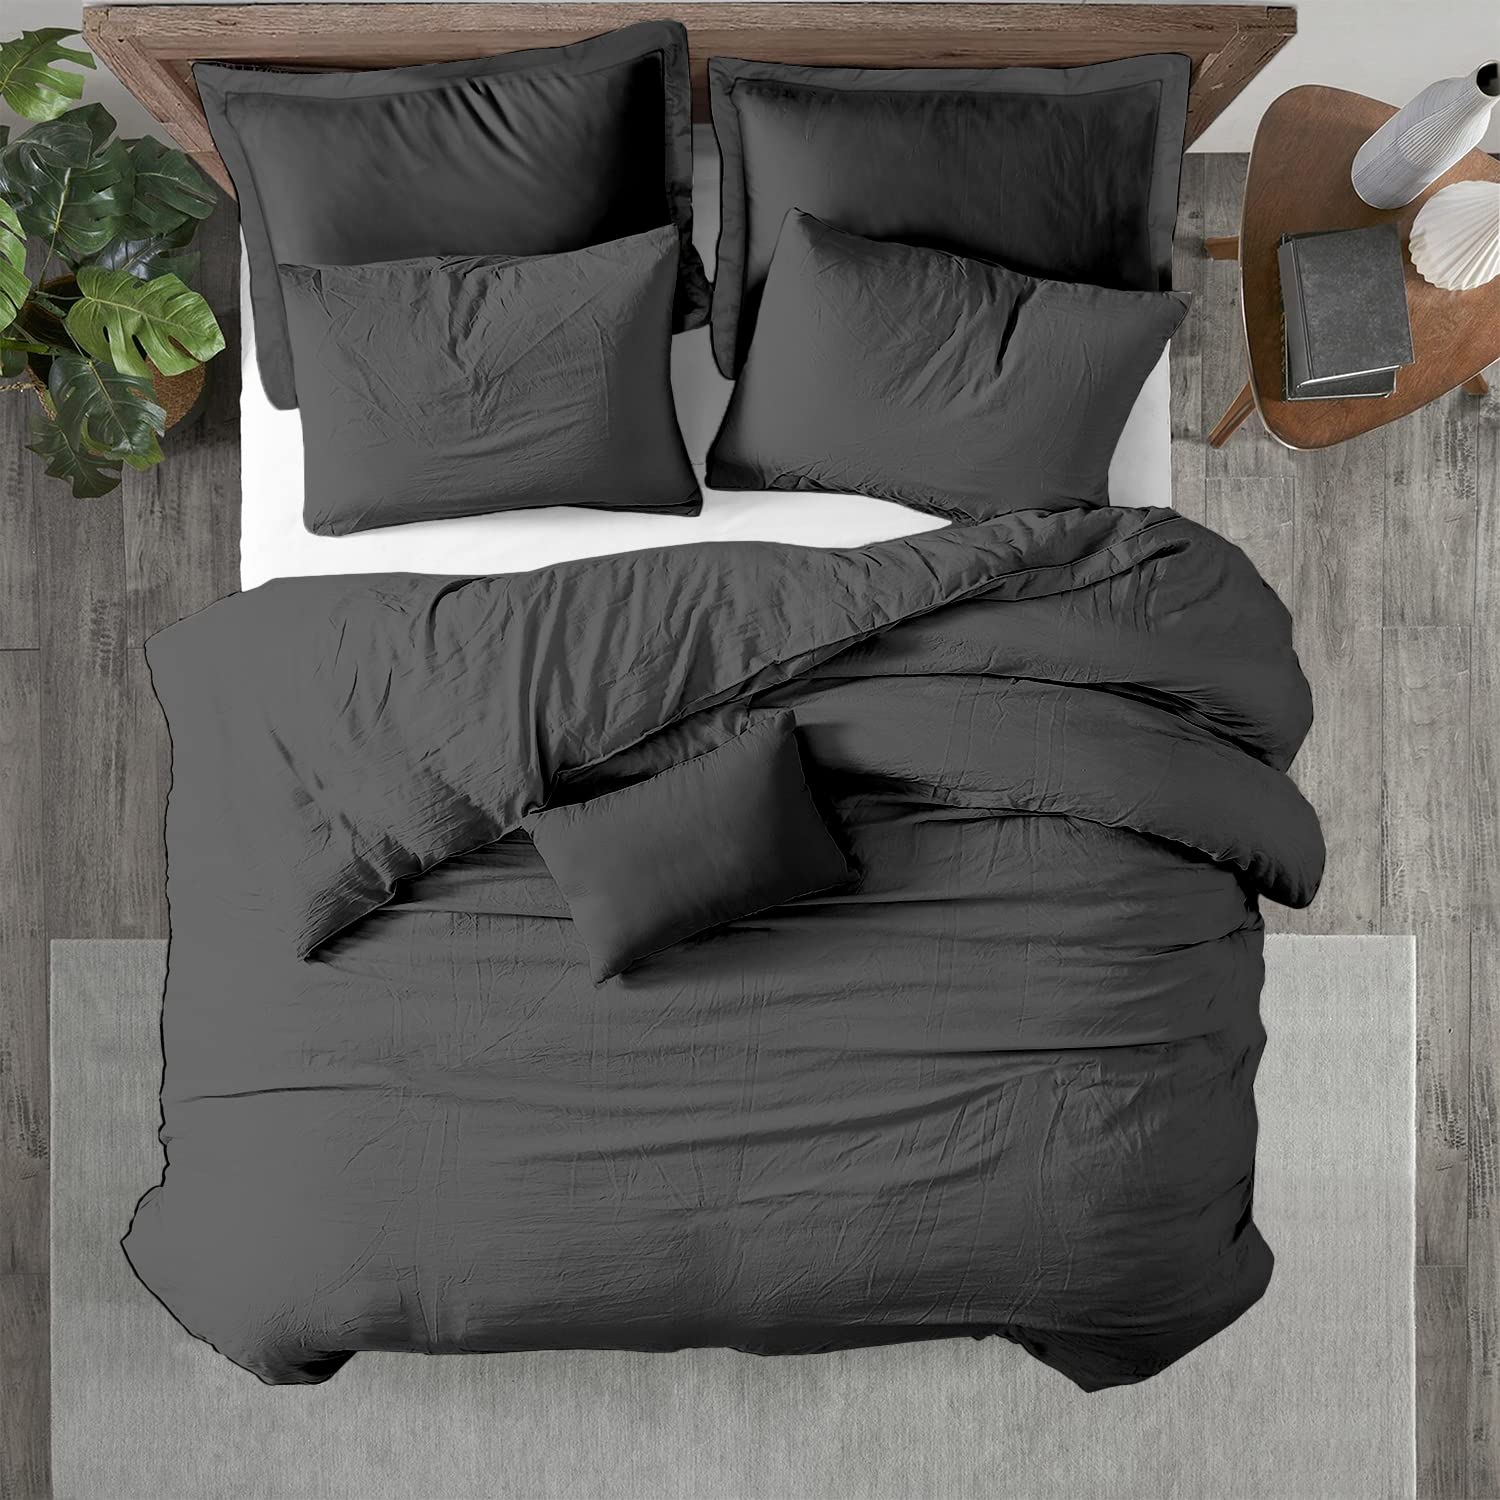 Book Cover Kotton Culture Oversized King Duvet Cover 3 Piece 100% Egyptian Cotton Breathable All Season 600 Thread Count with Zipper & Corner Ties Soft Comforter Cover (Oversized King, Grey) 3 Pc Oversized King Solid Duvet Cover Sets Grey